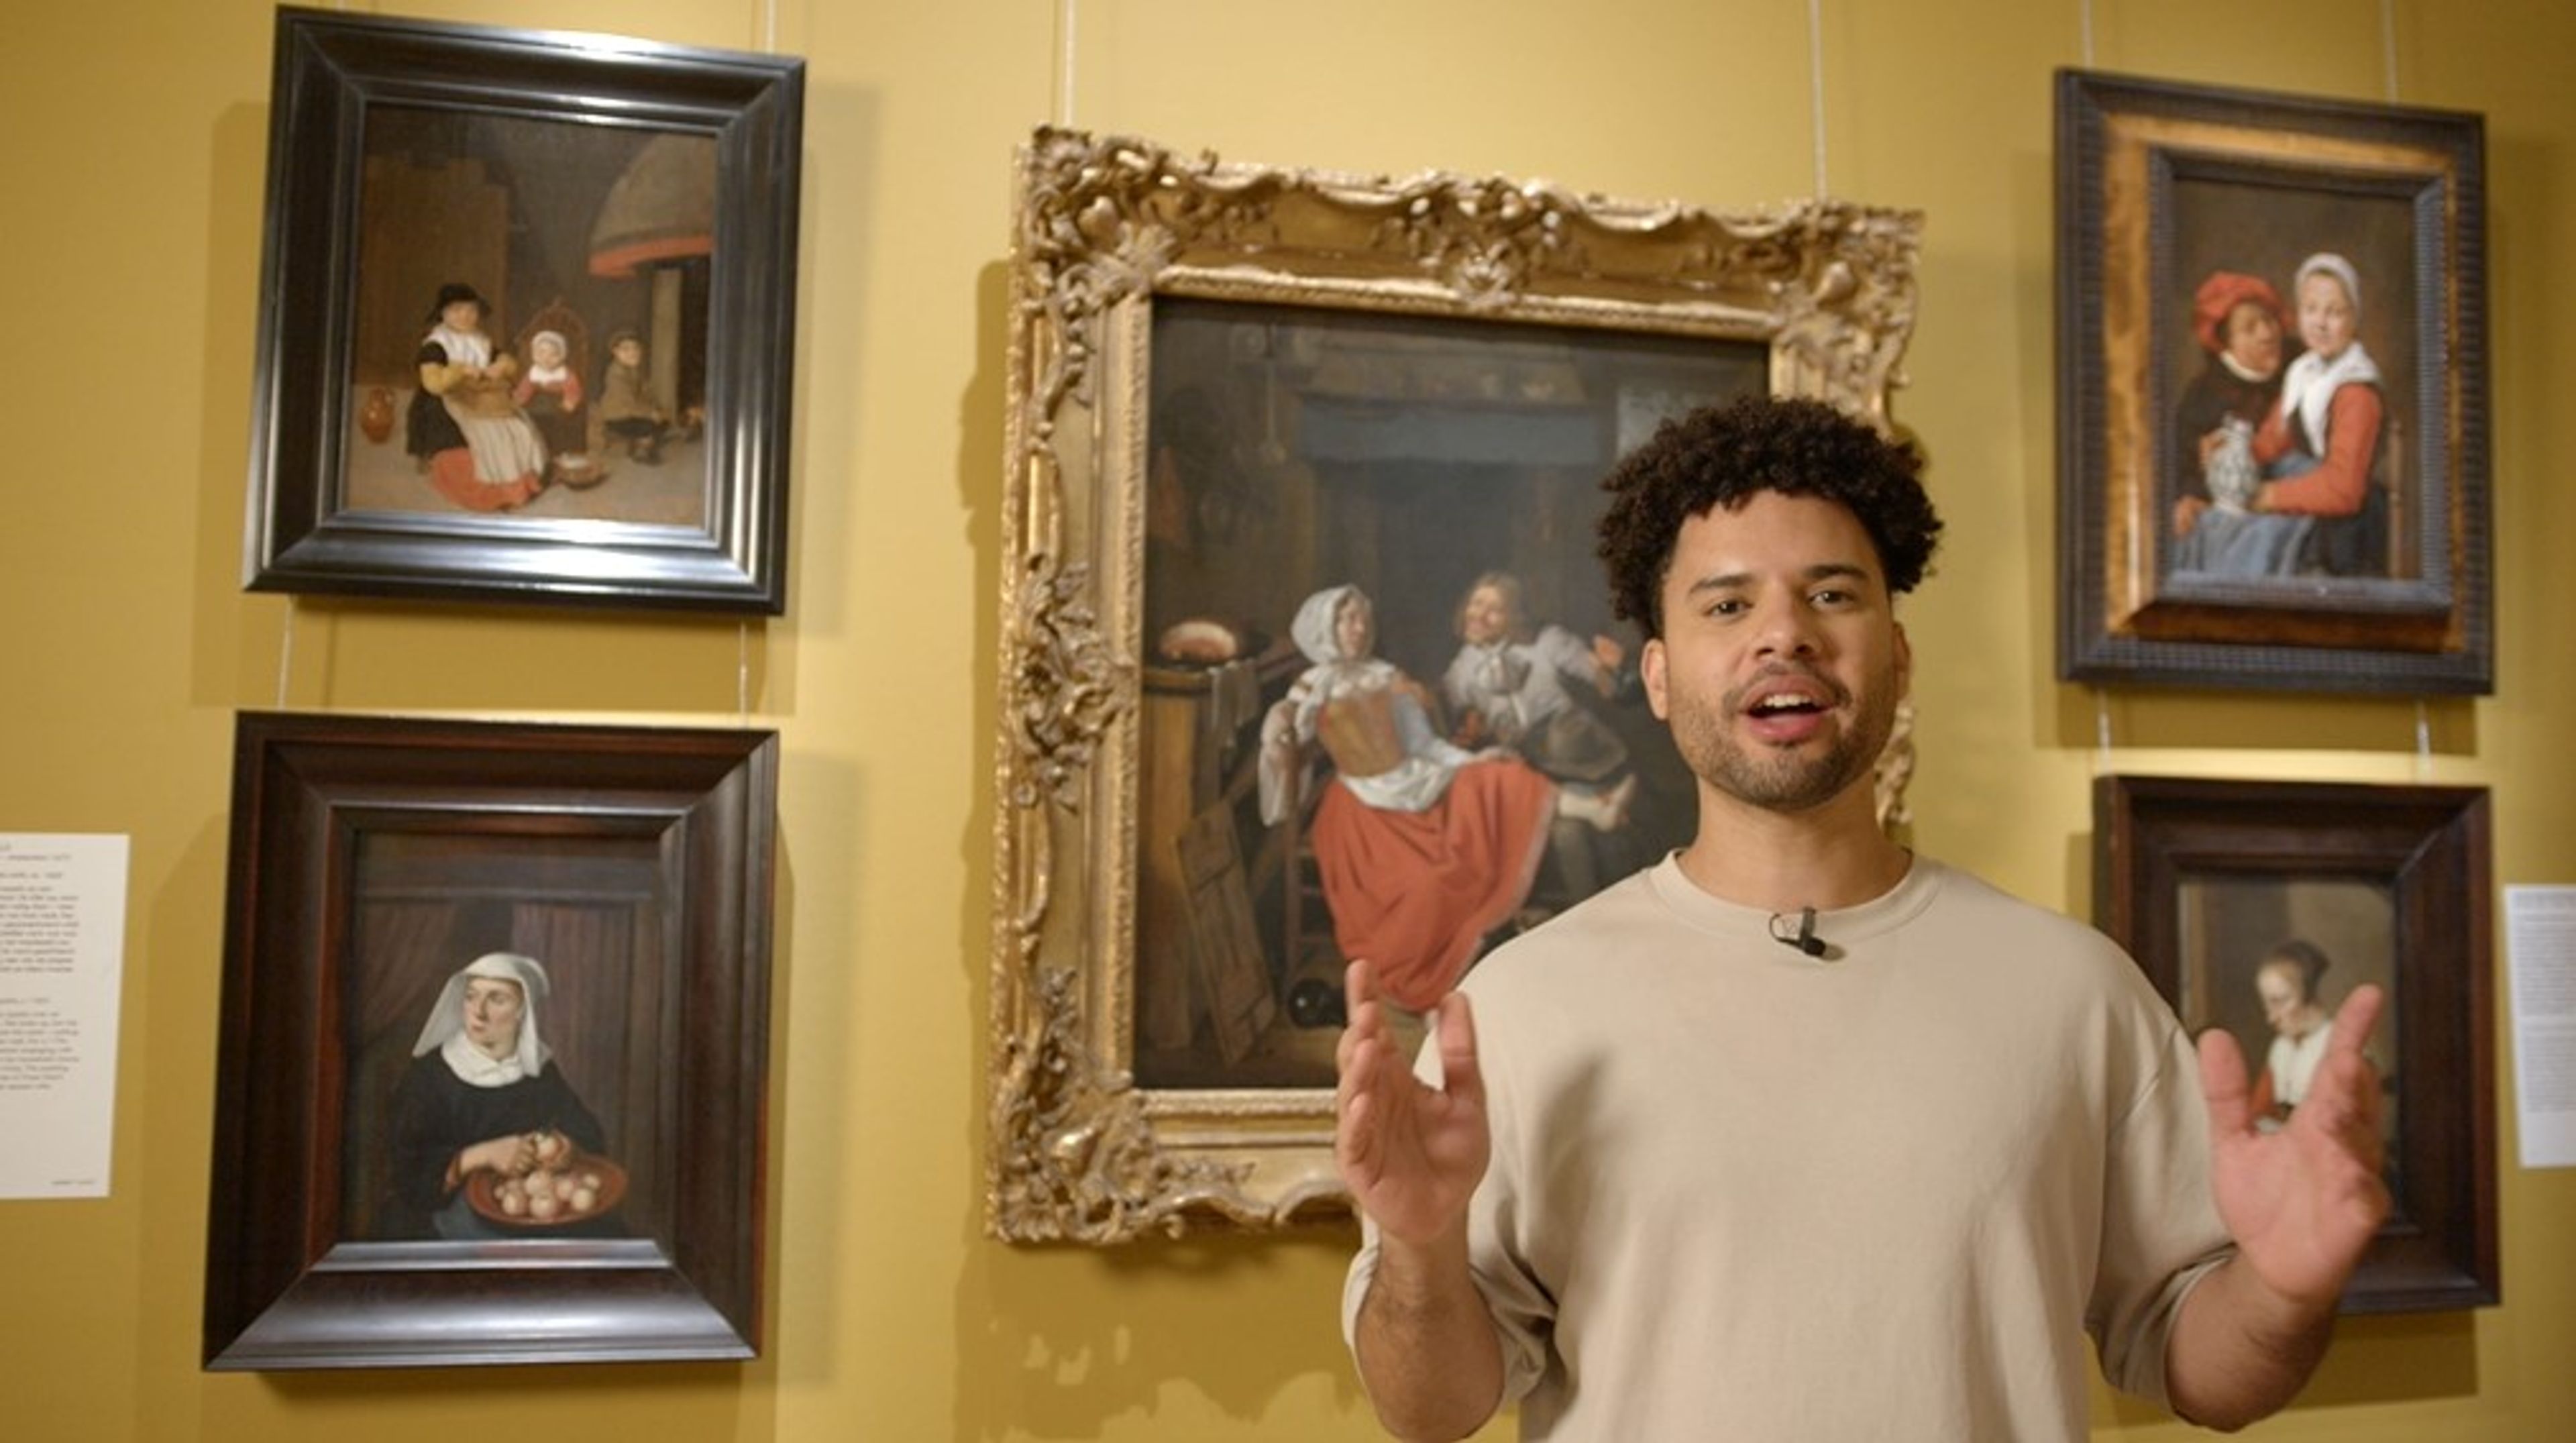 Still from a short educational video for primary and secondary education by the Frans Hals Museum.